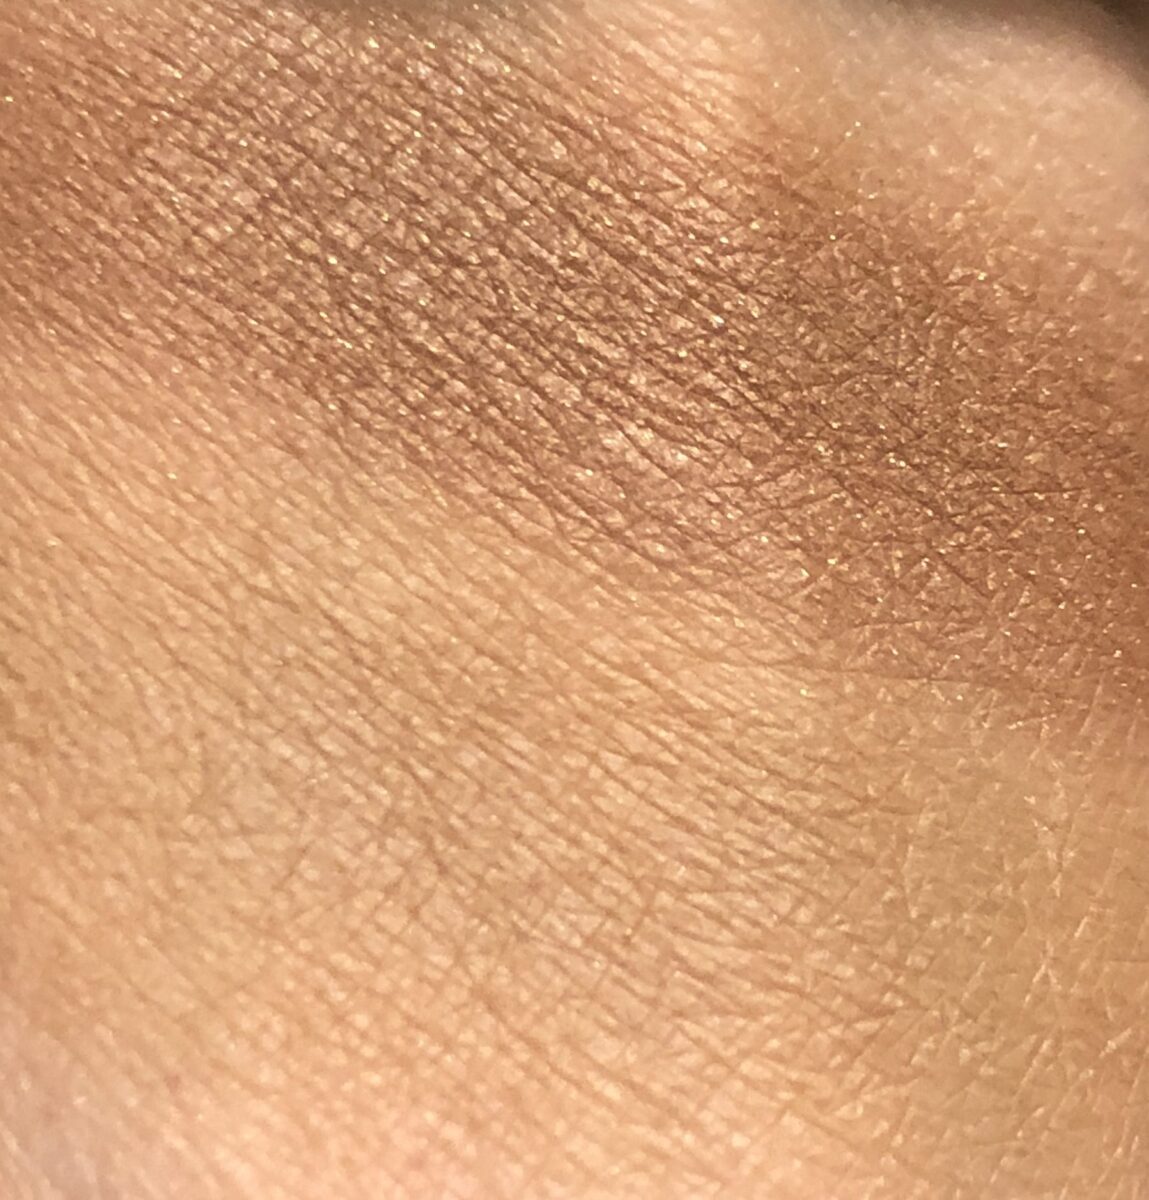 SURRATT BEYOND BEIGE EYESHADOW PALETTE SWATCHES CUIVRE ON THE TOP, AND GREIGE ON THE BOTTOM